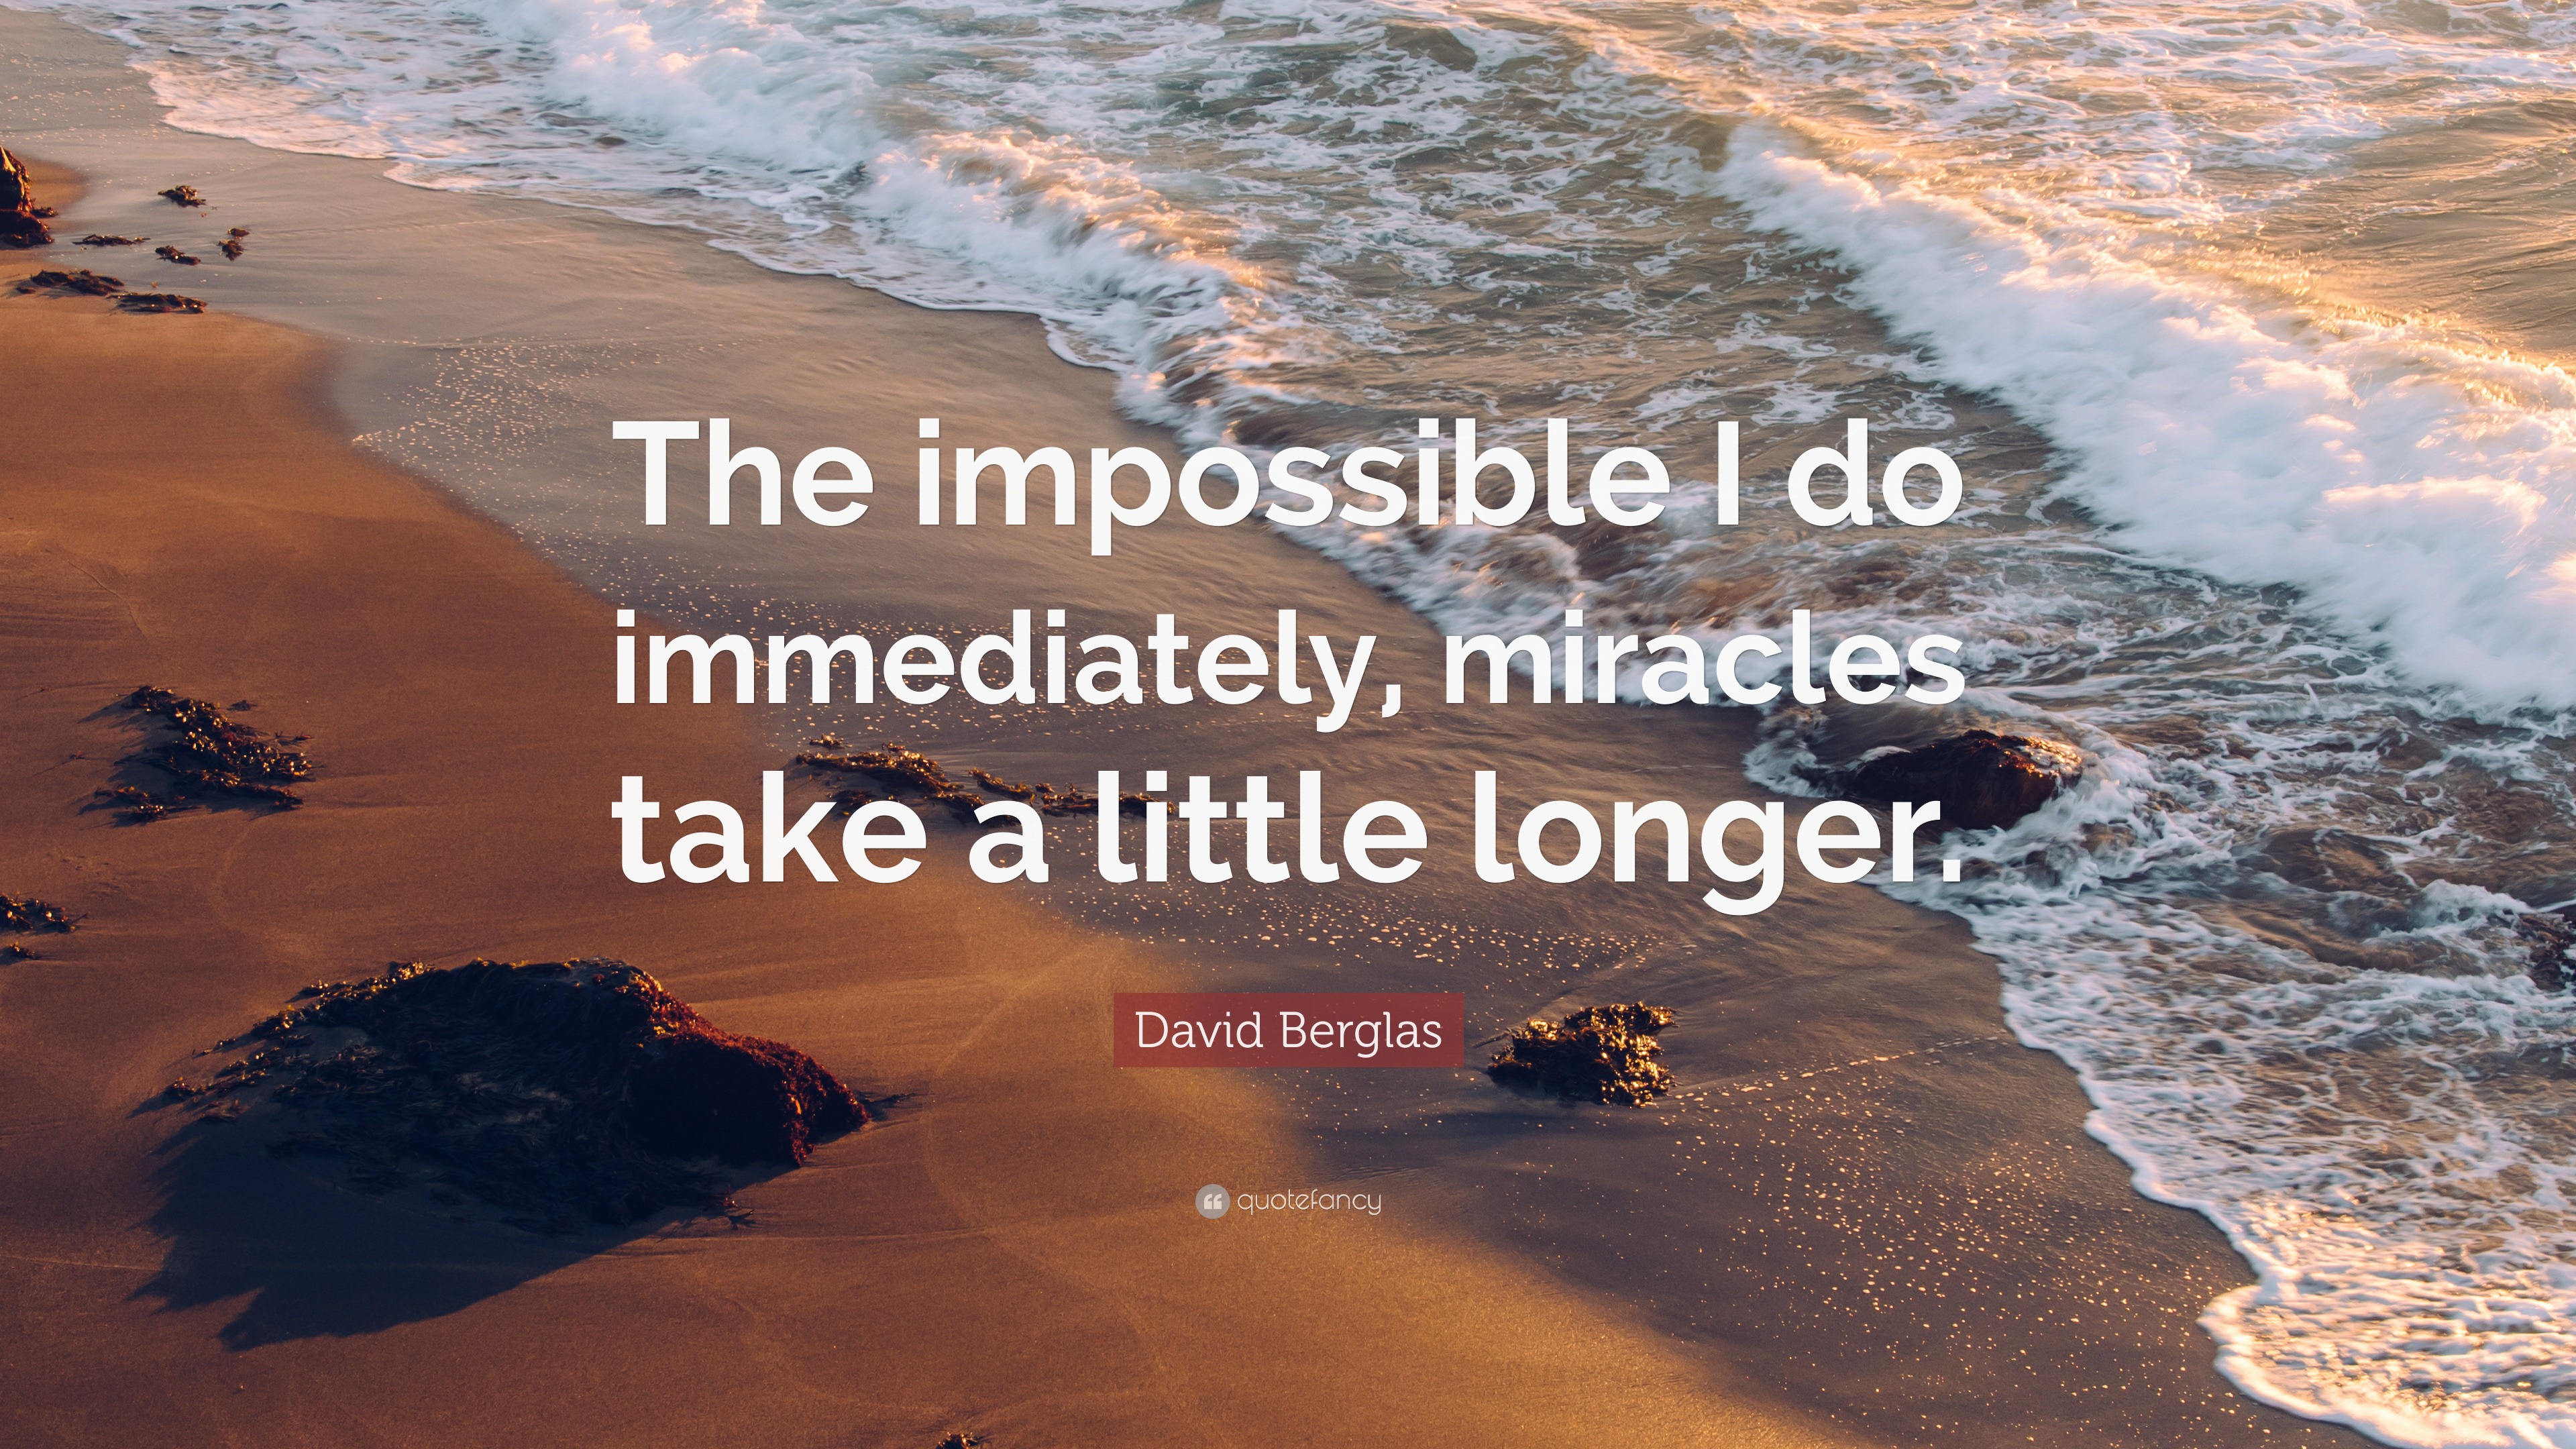 David Berglas Quote: “The impossible I do immediately, miracles take a  little longer.”